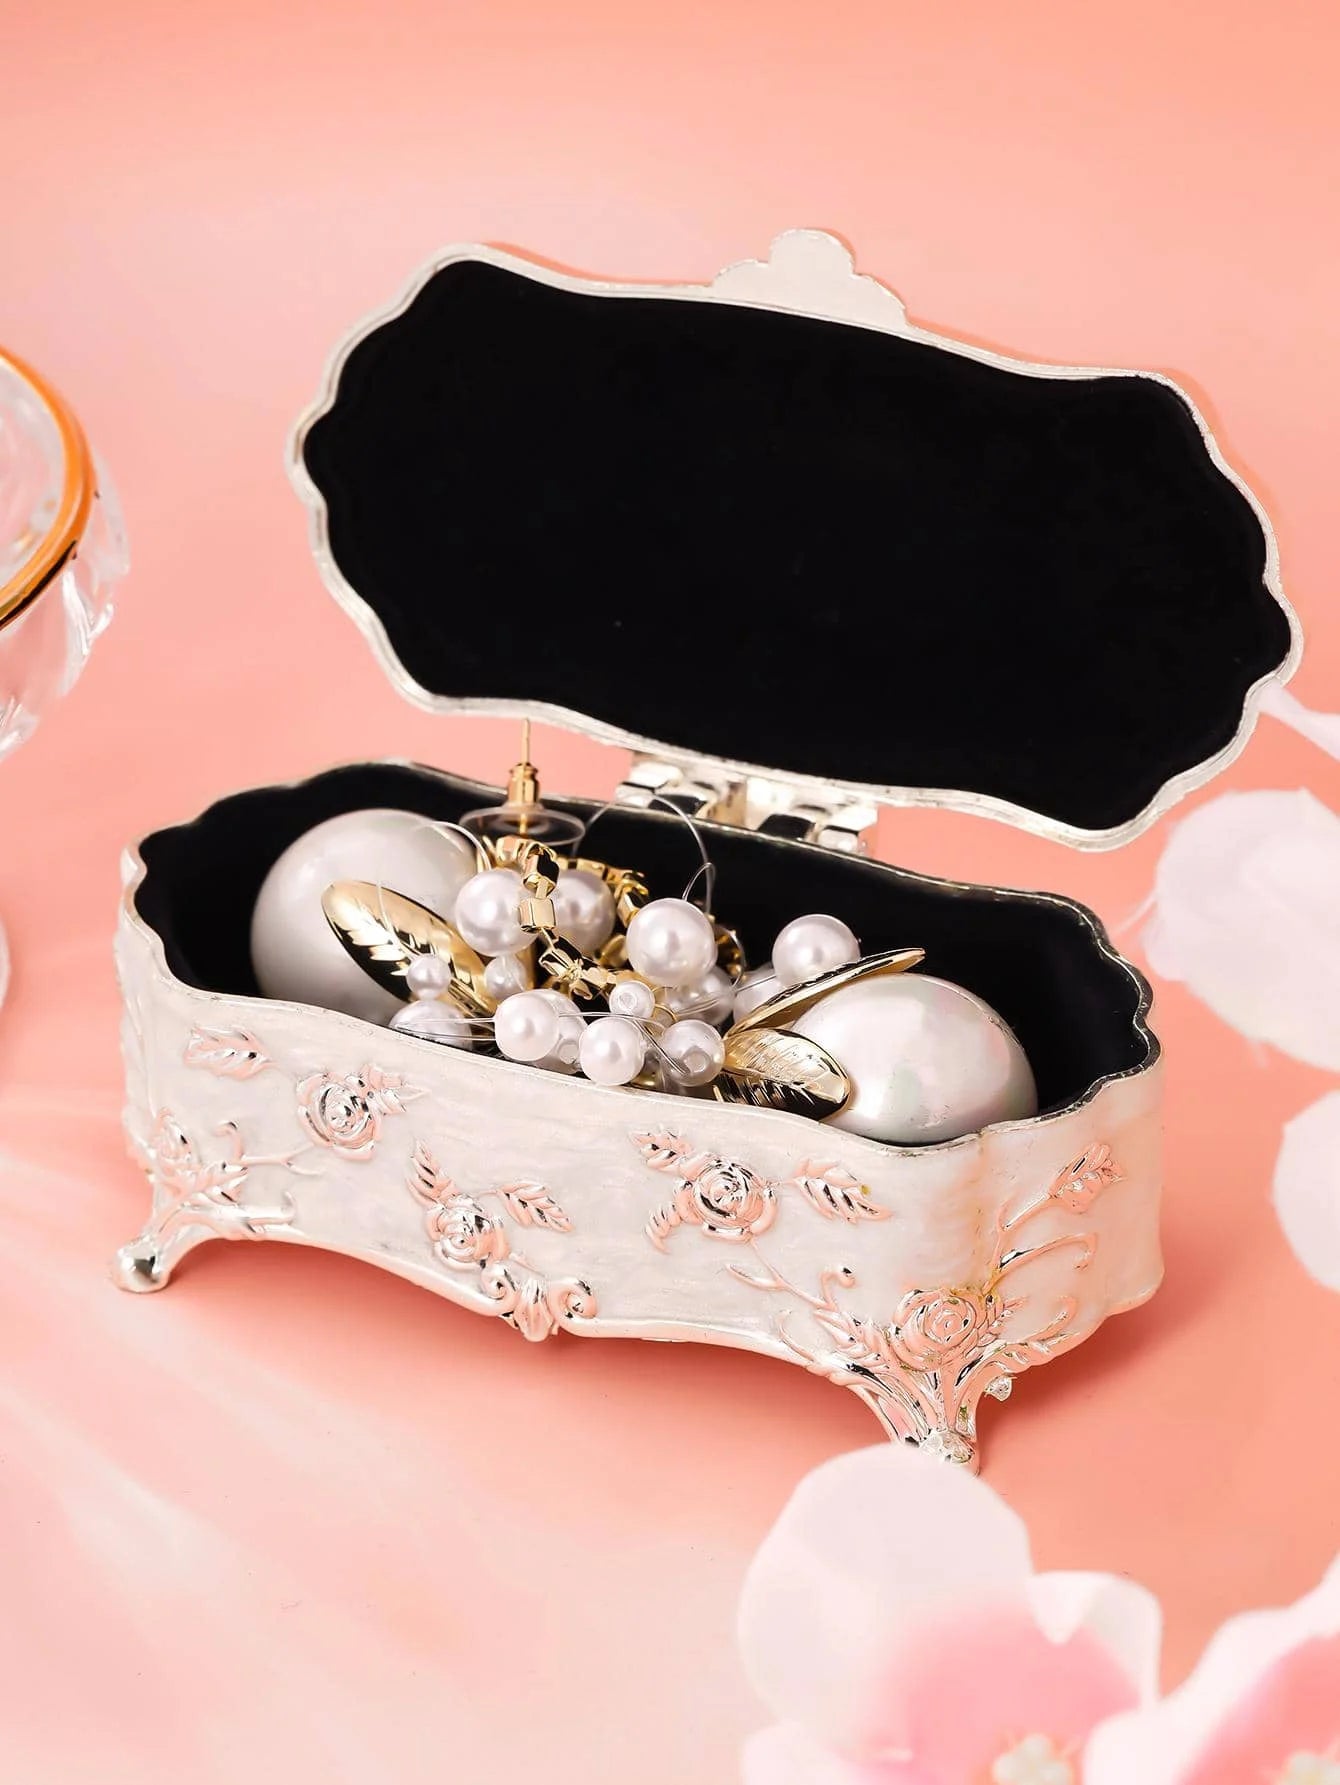 a white box filled with ornaments on top of a table